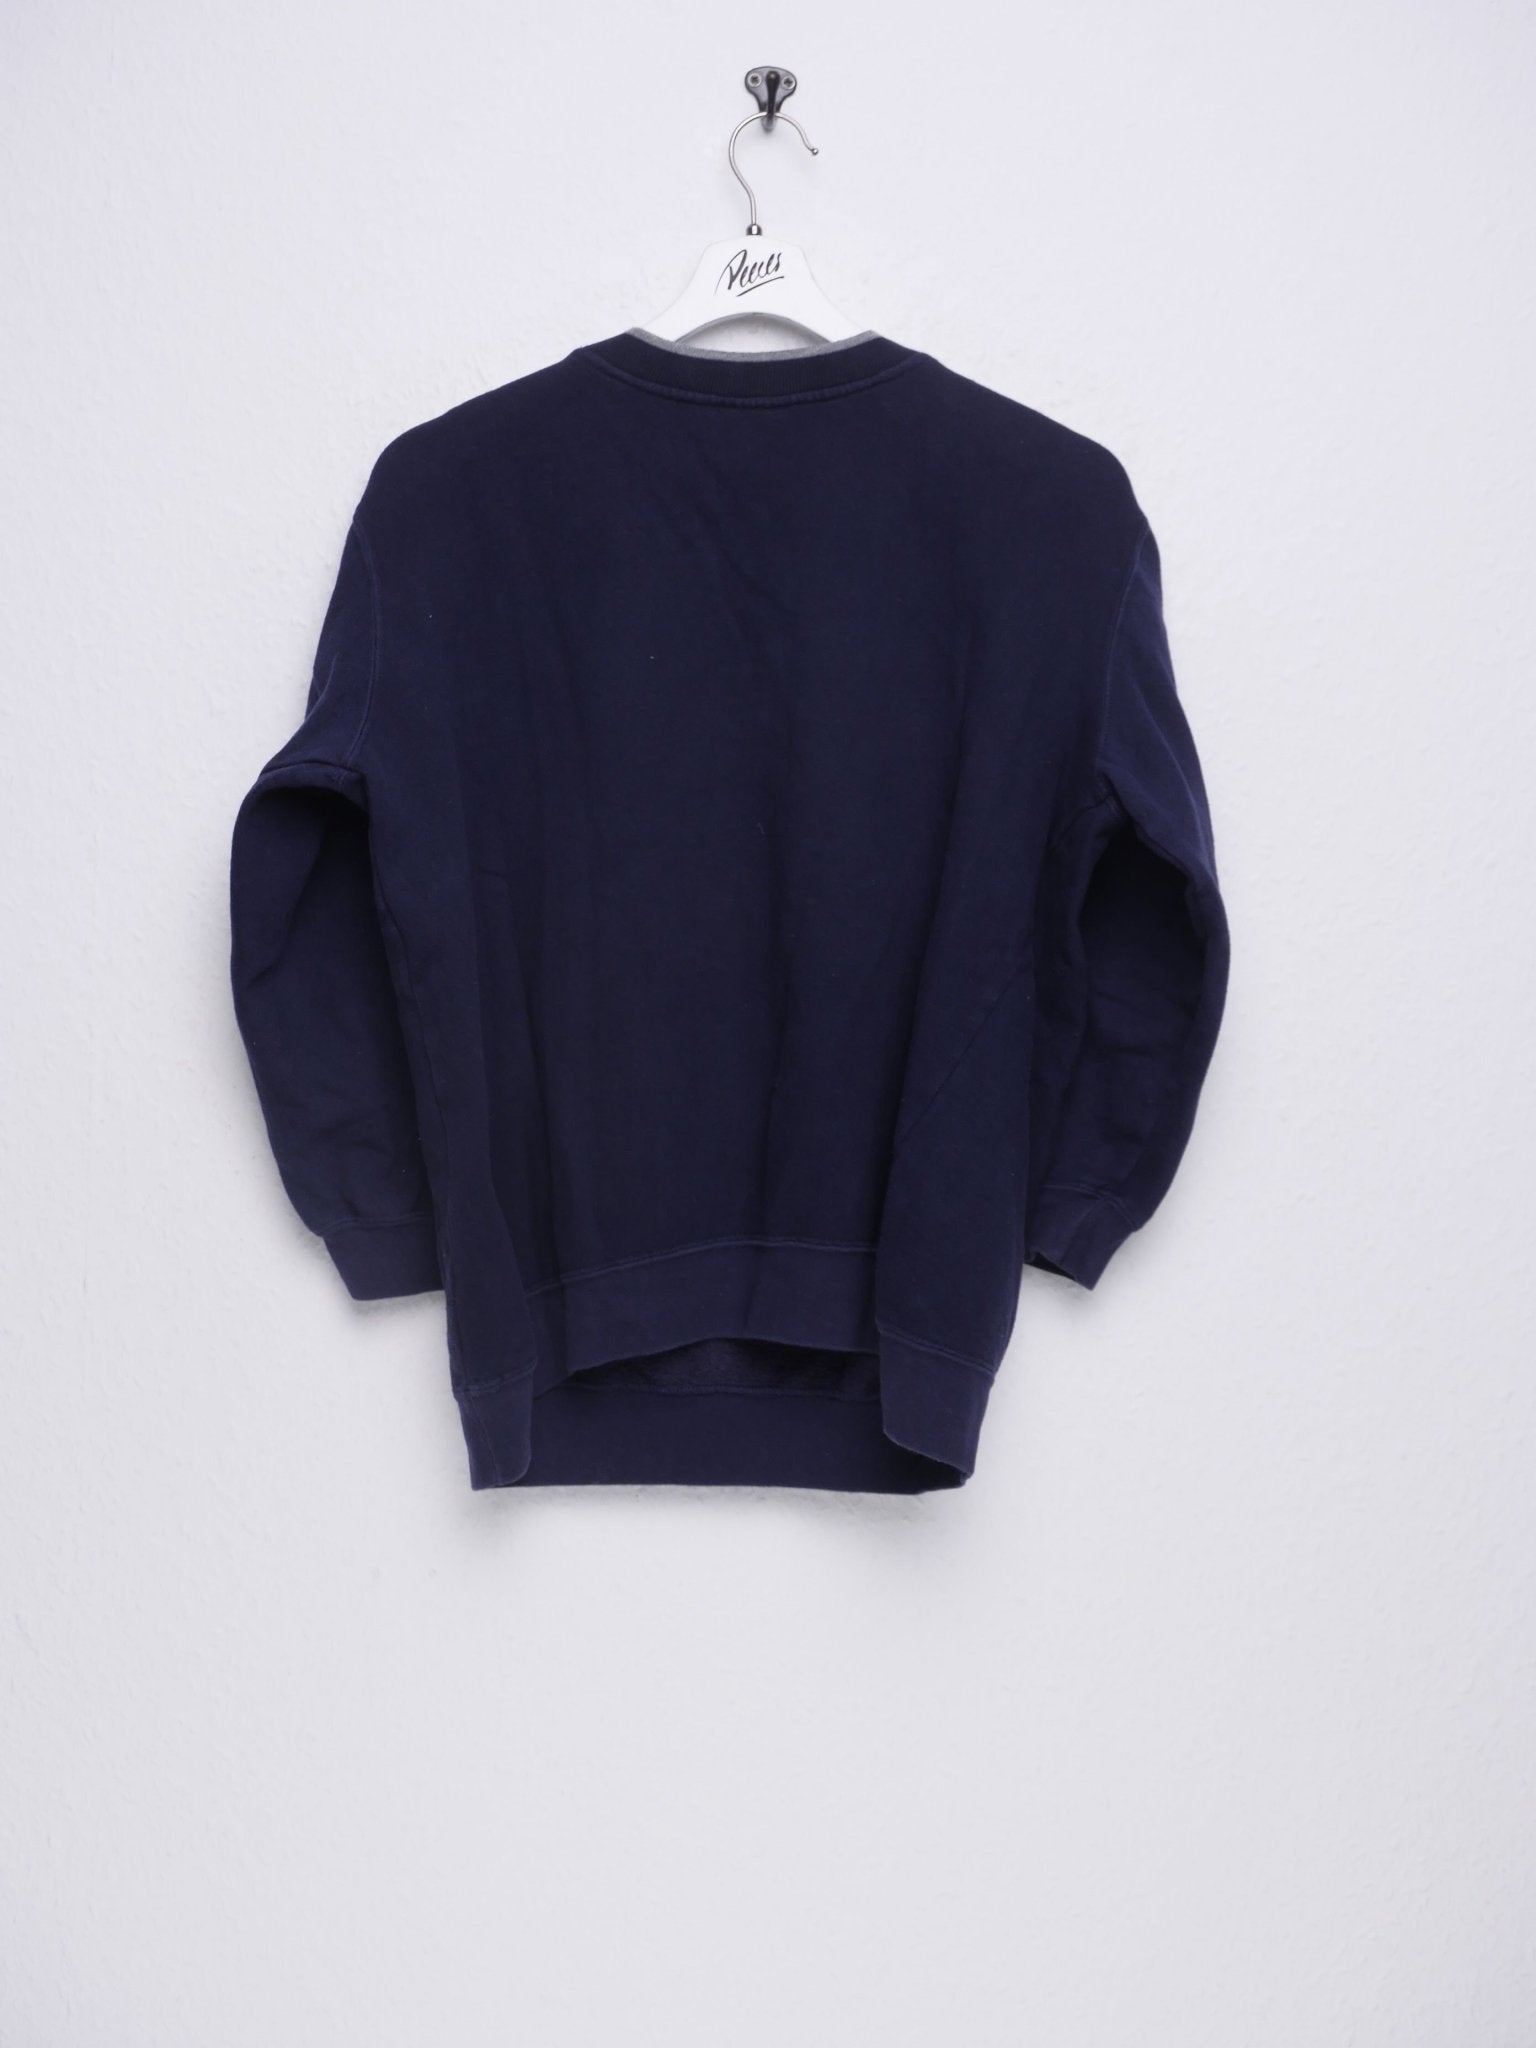 Marvin the Martian embroidered Spellout navy Sweater - Peeces